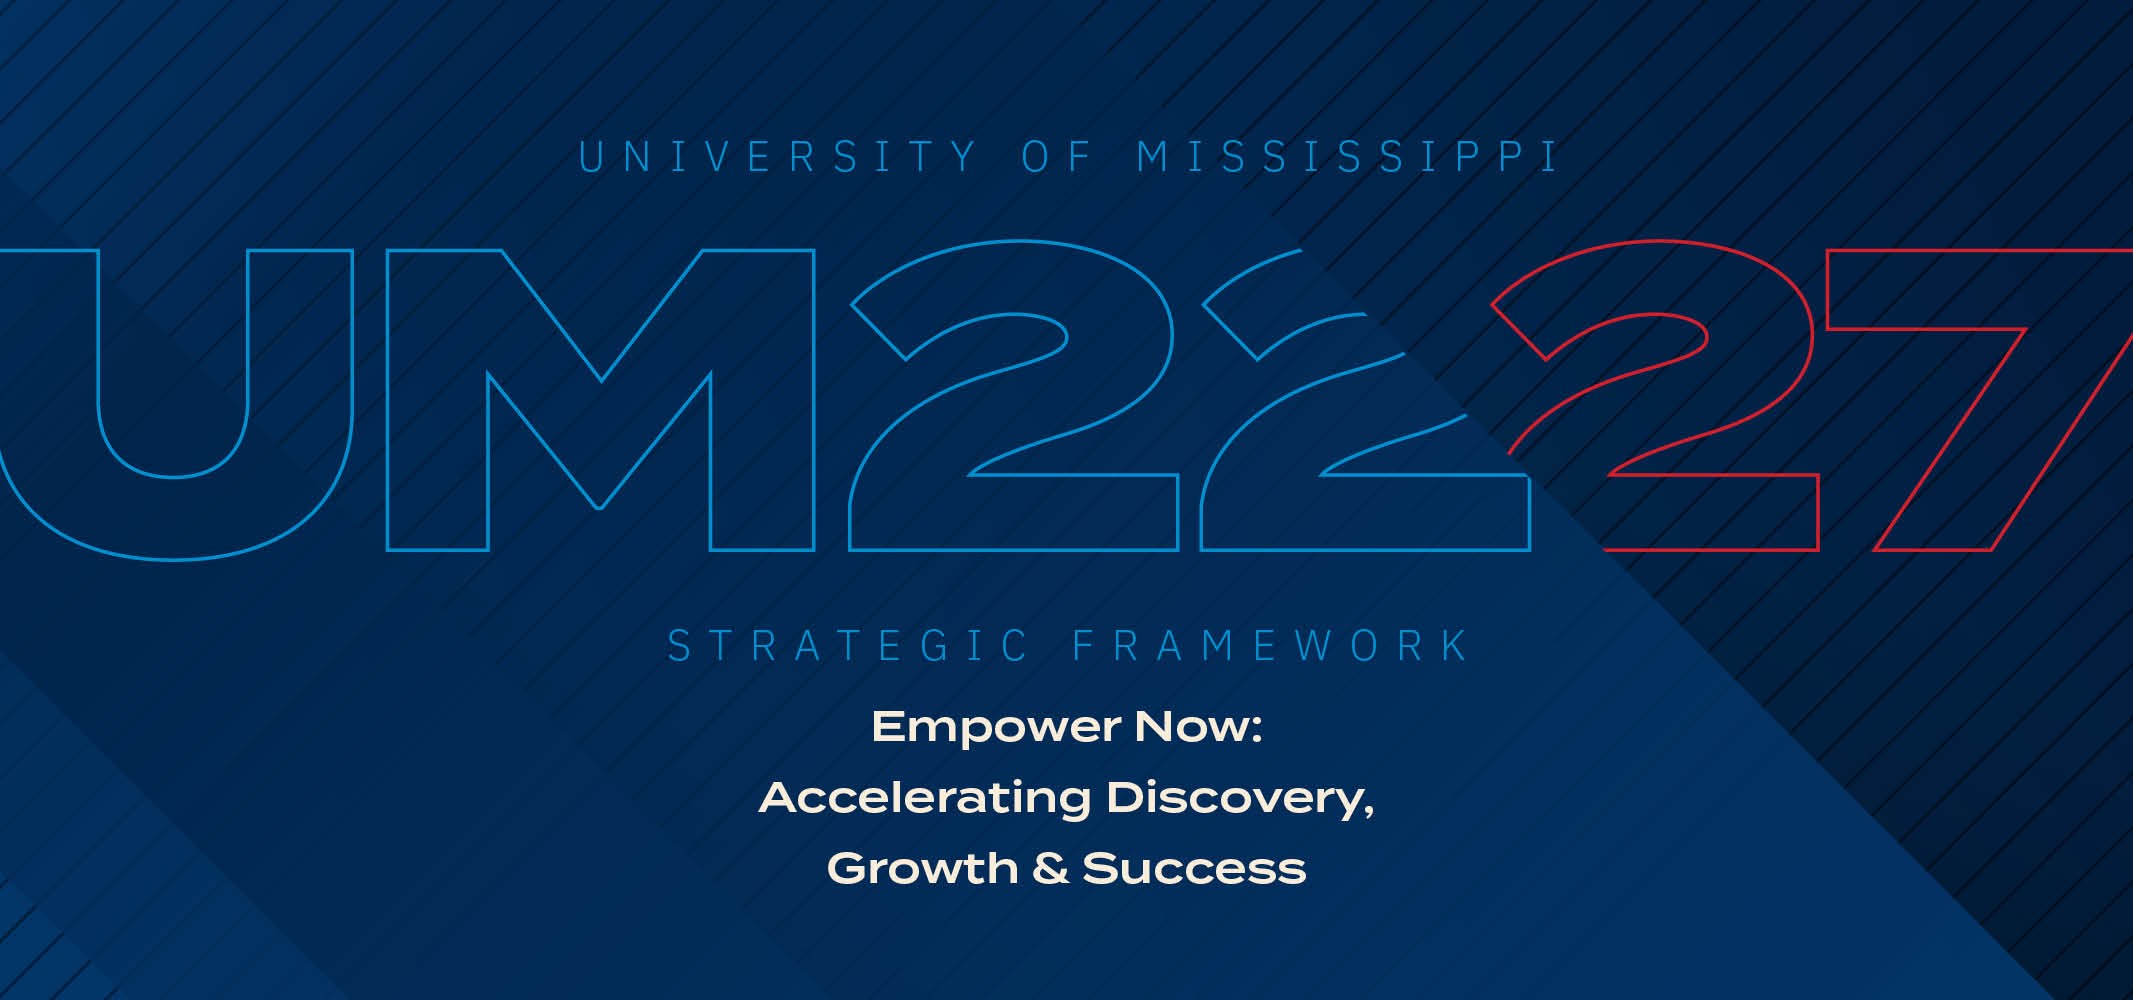 The University of Mississippi 2022/2027 Strategic Framework Empower Now: Ecelerating Discovery, Growth & Success